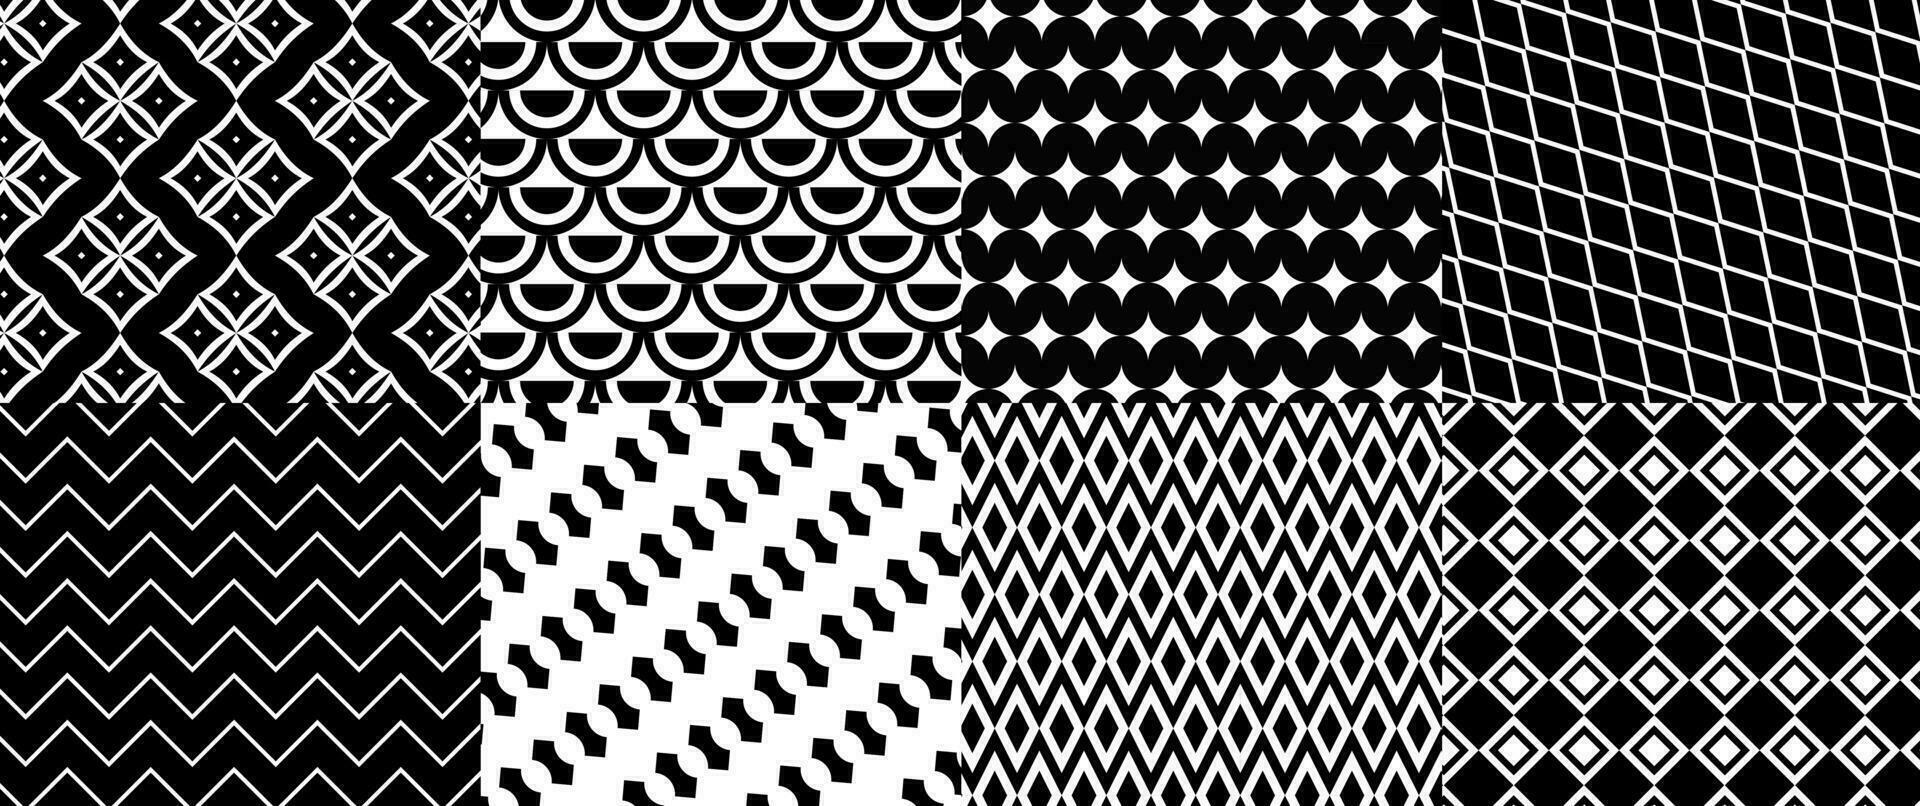 Collection of Geometric Background - Seamless Patterns - Vector Illustration - Black and White Patterns